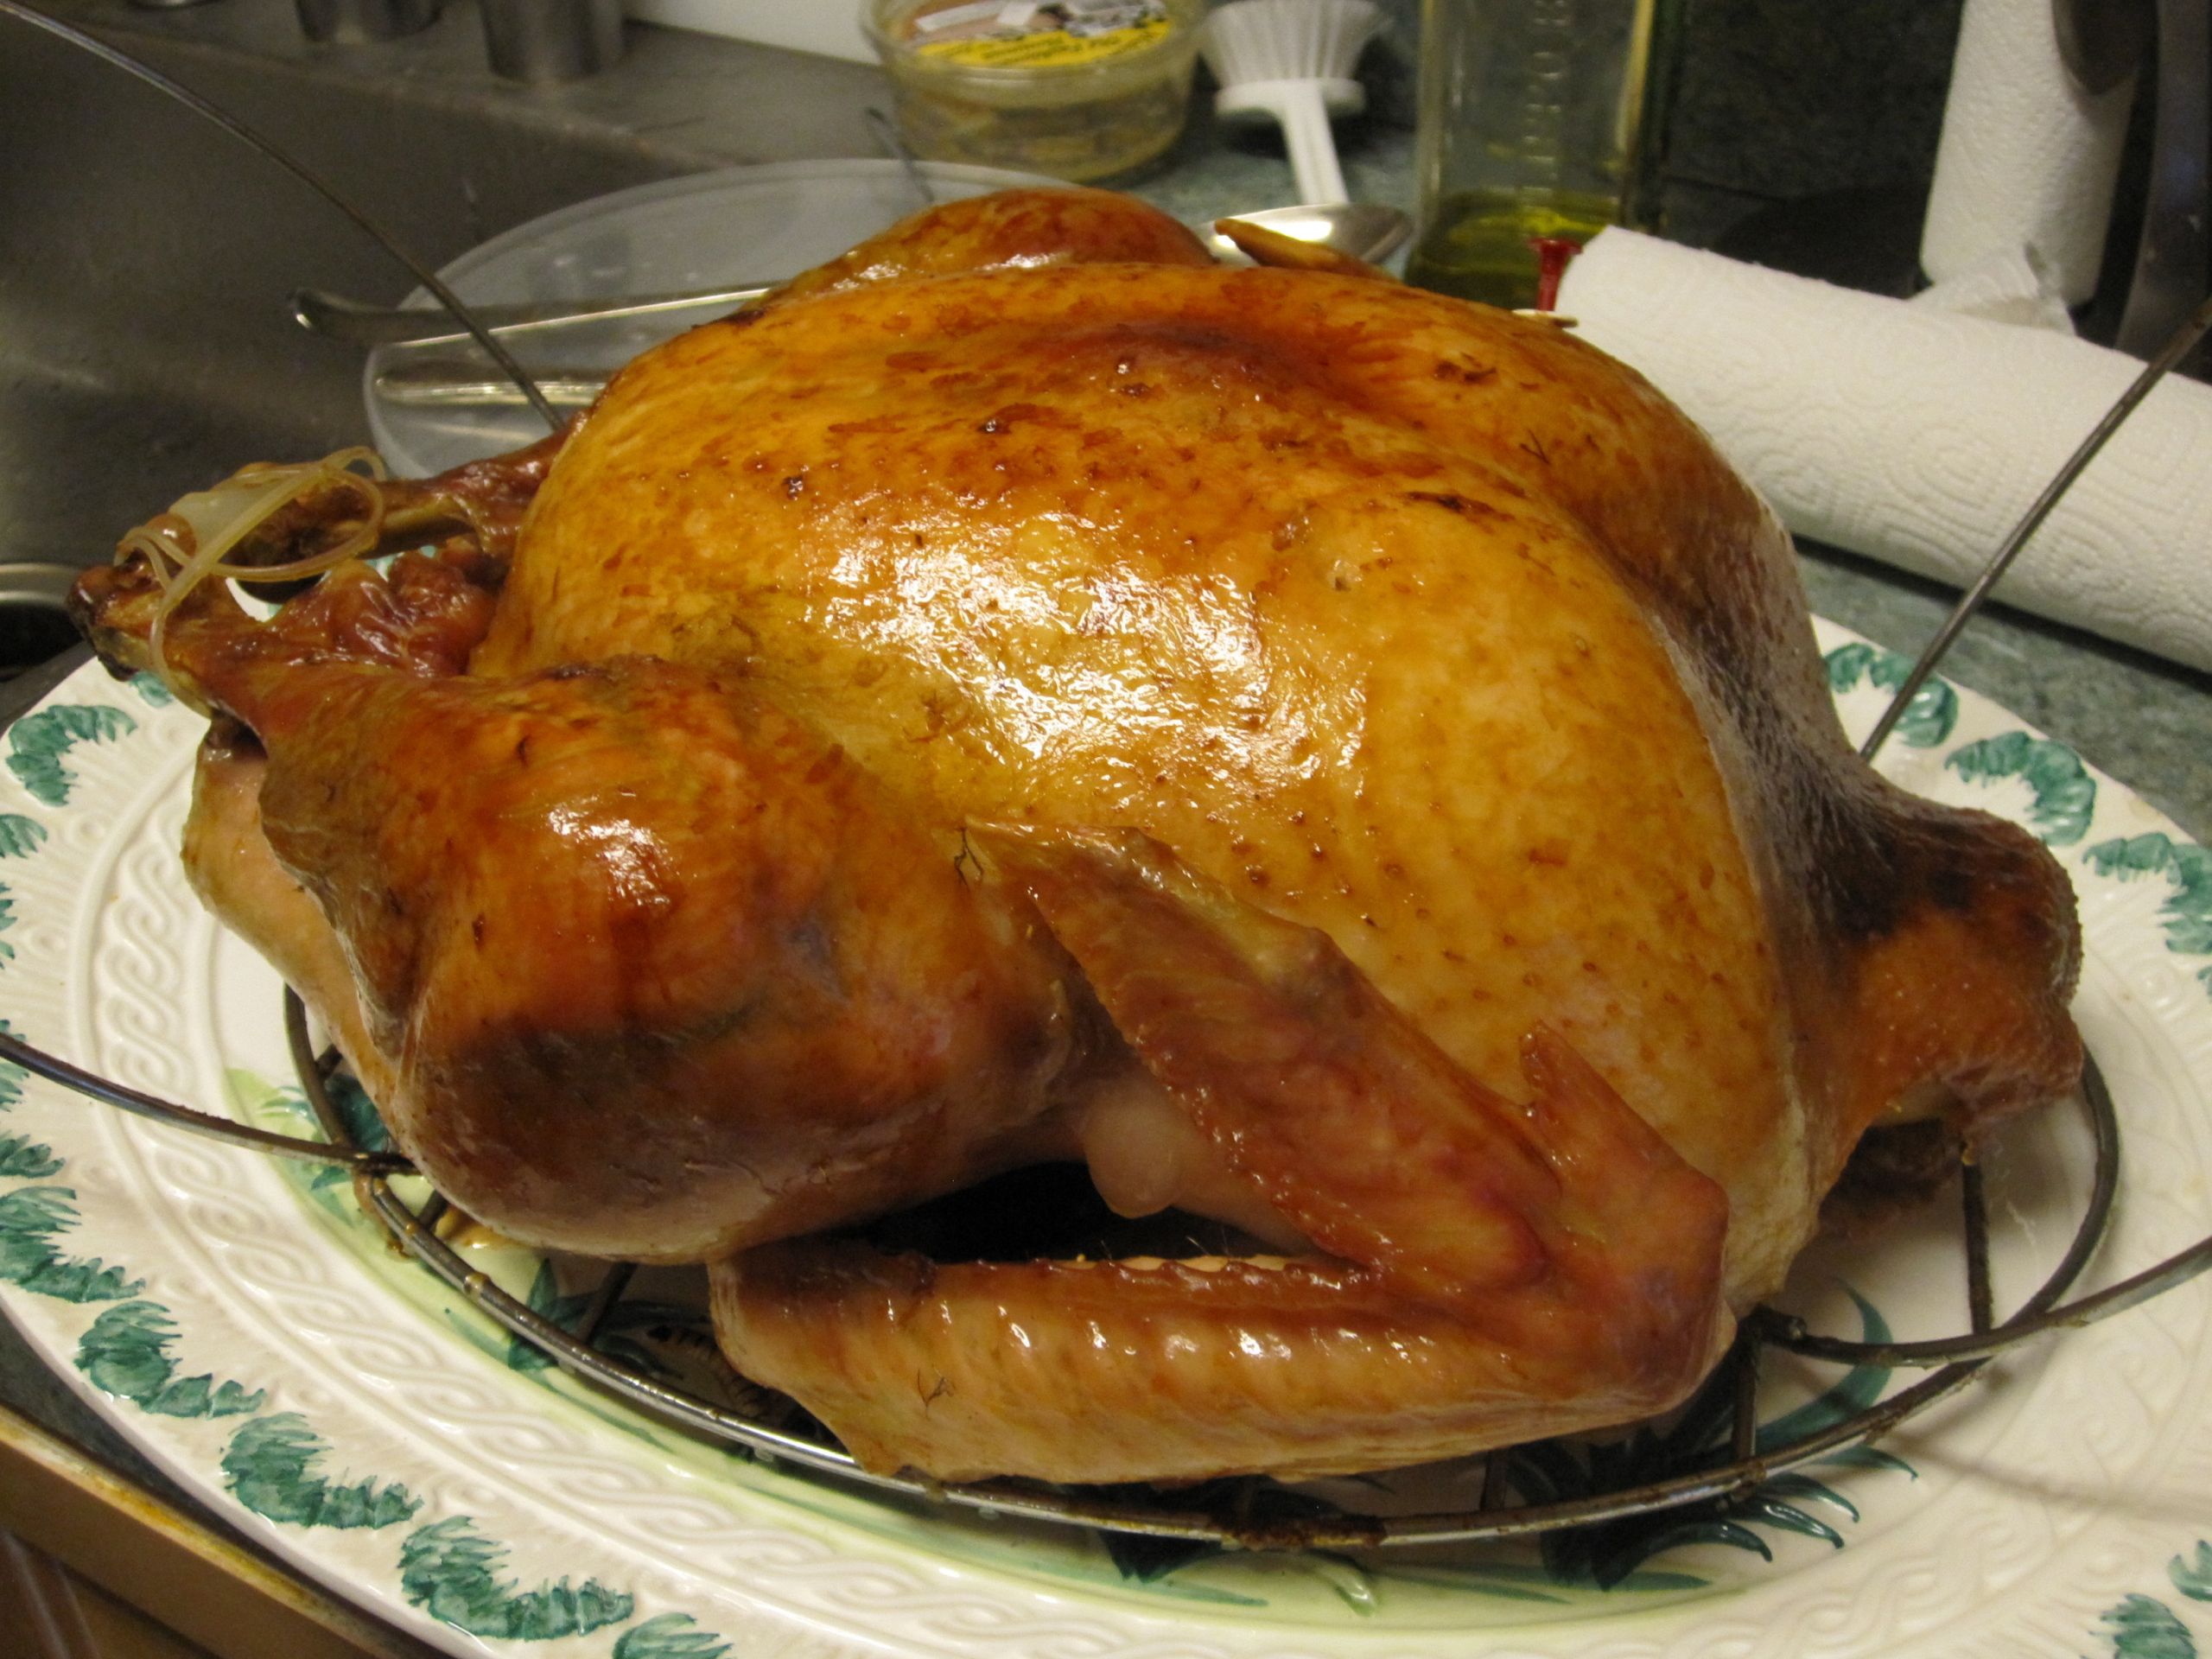 Order Thanksgiving Turkey
 The top 30 Ideas About order Cooked Thanksgiving Turkey